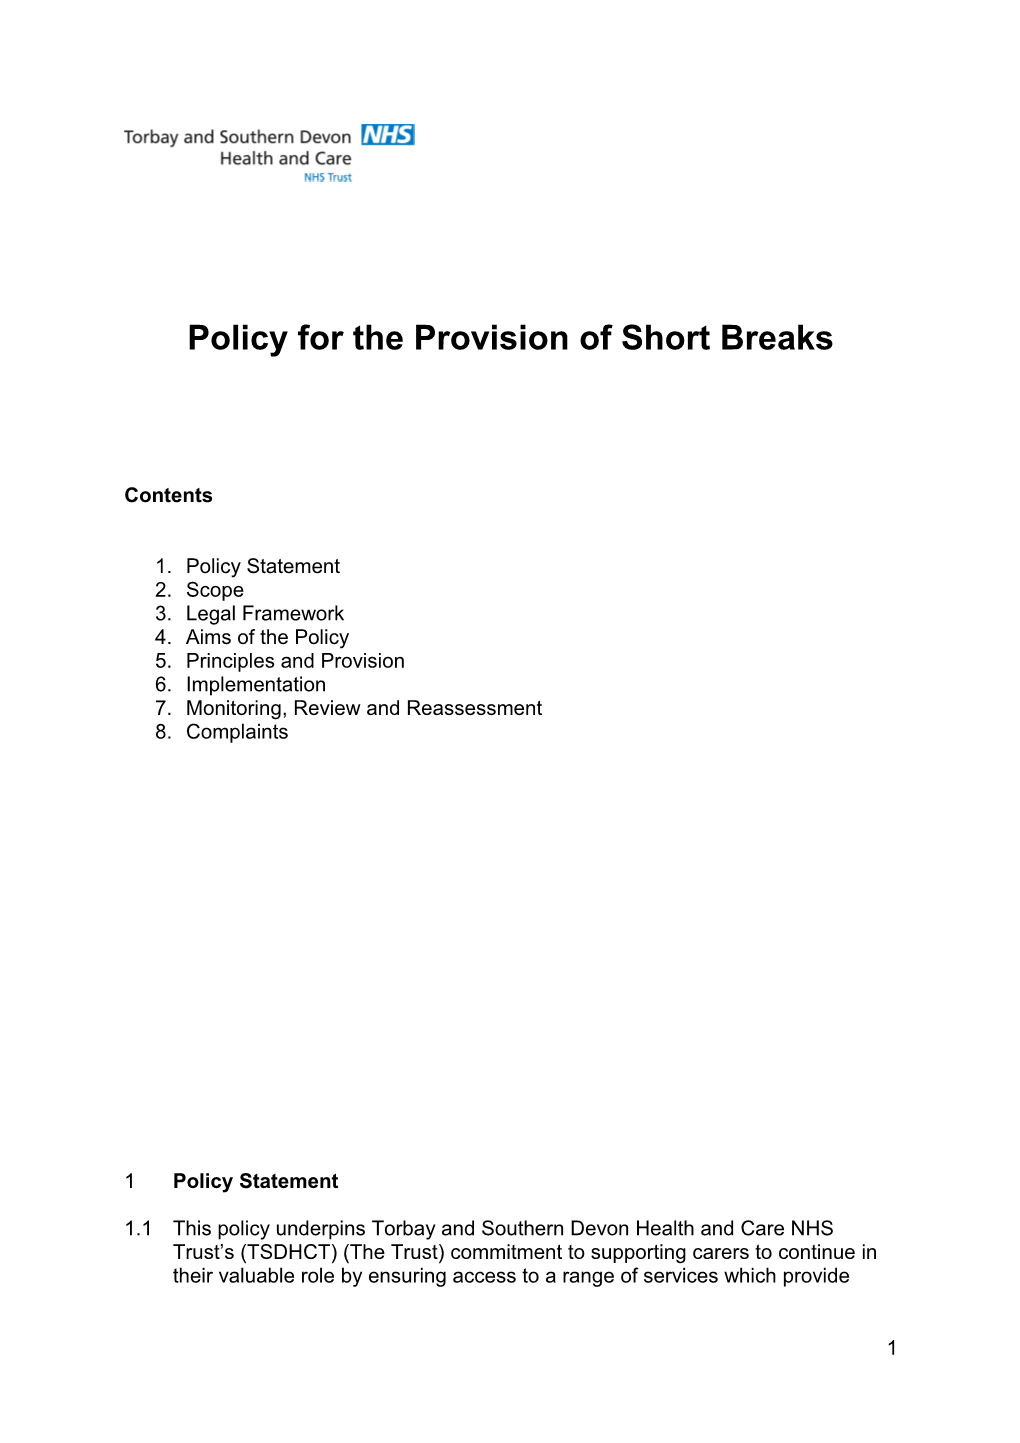 Policy for the Provision of Short Breaks